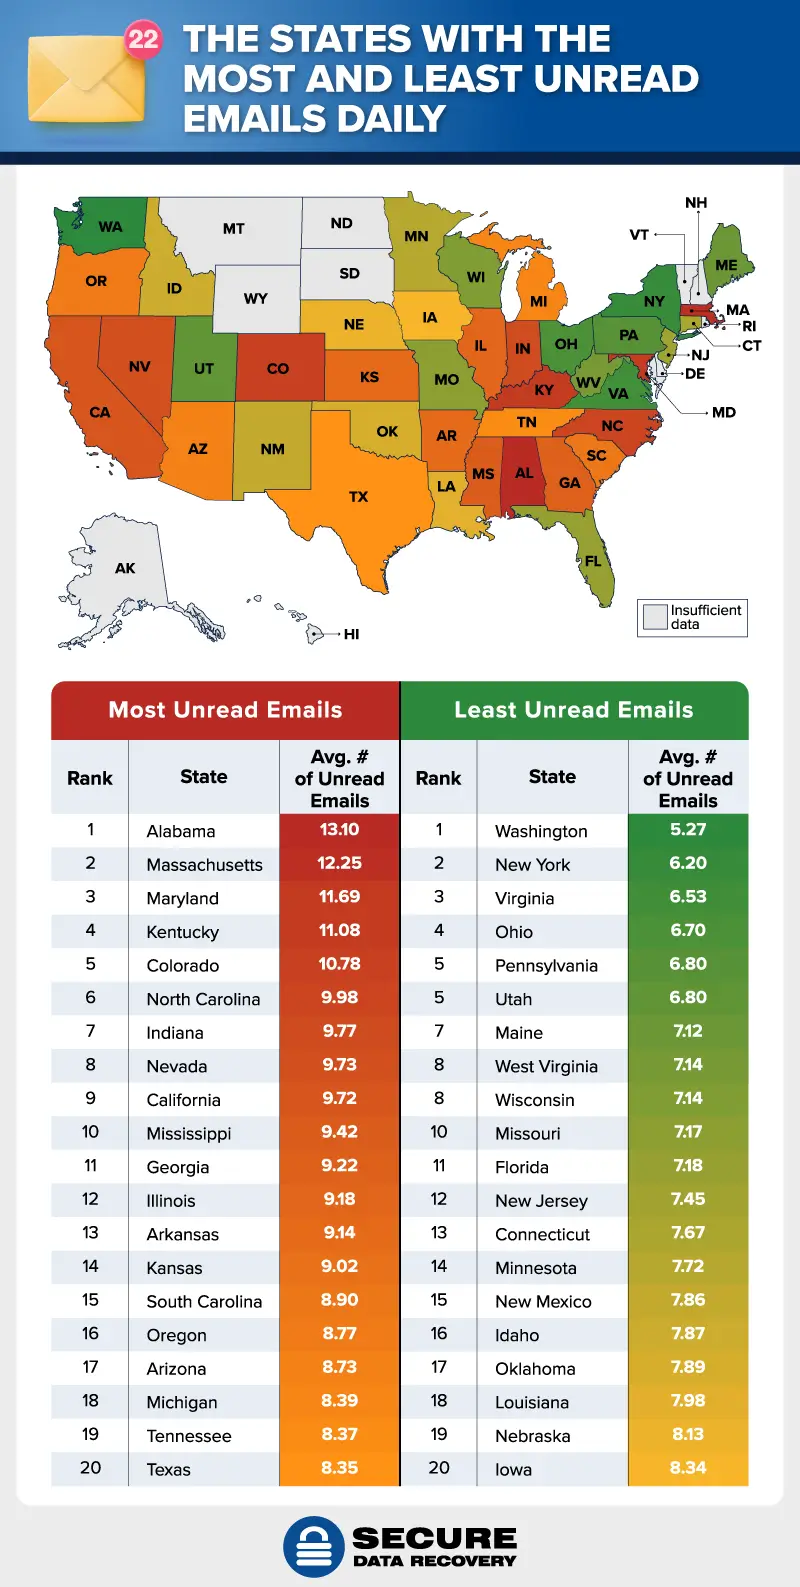 states with the most and least unread emails